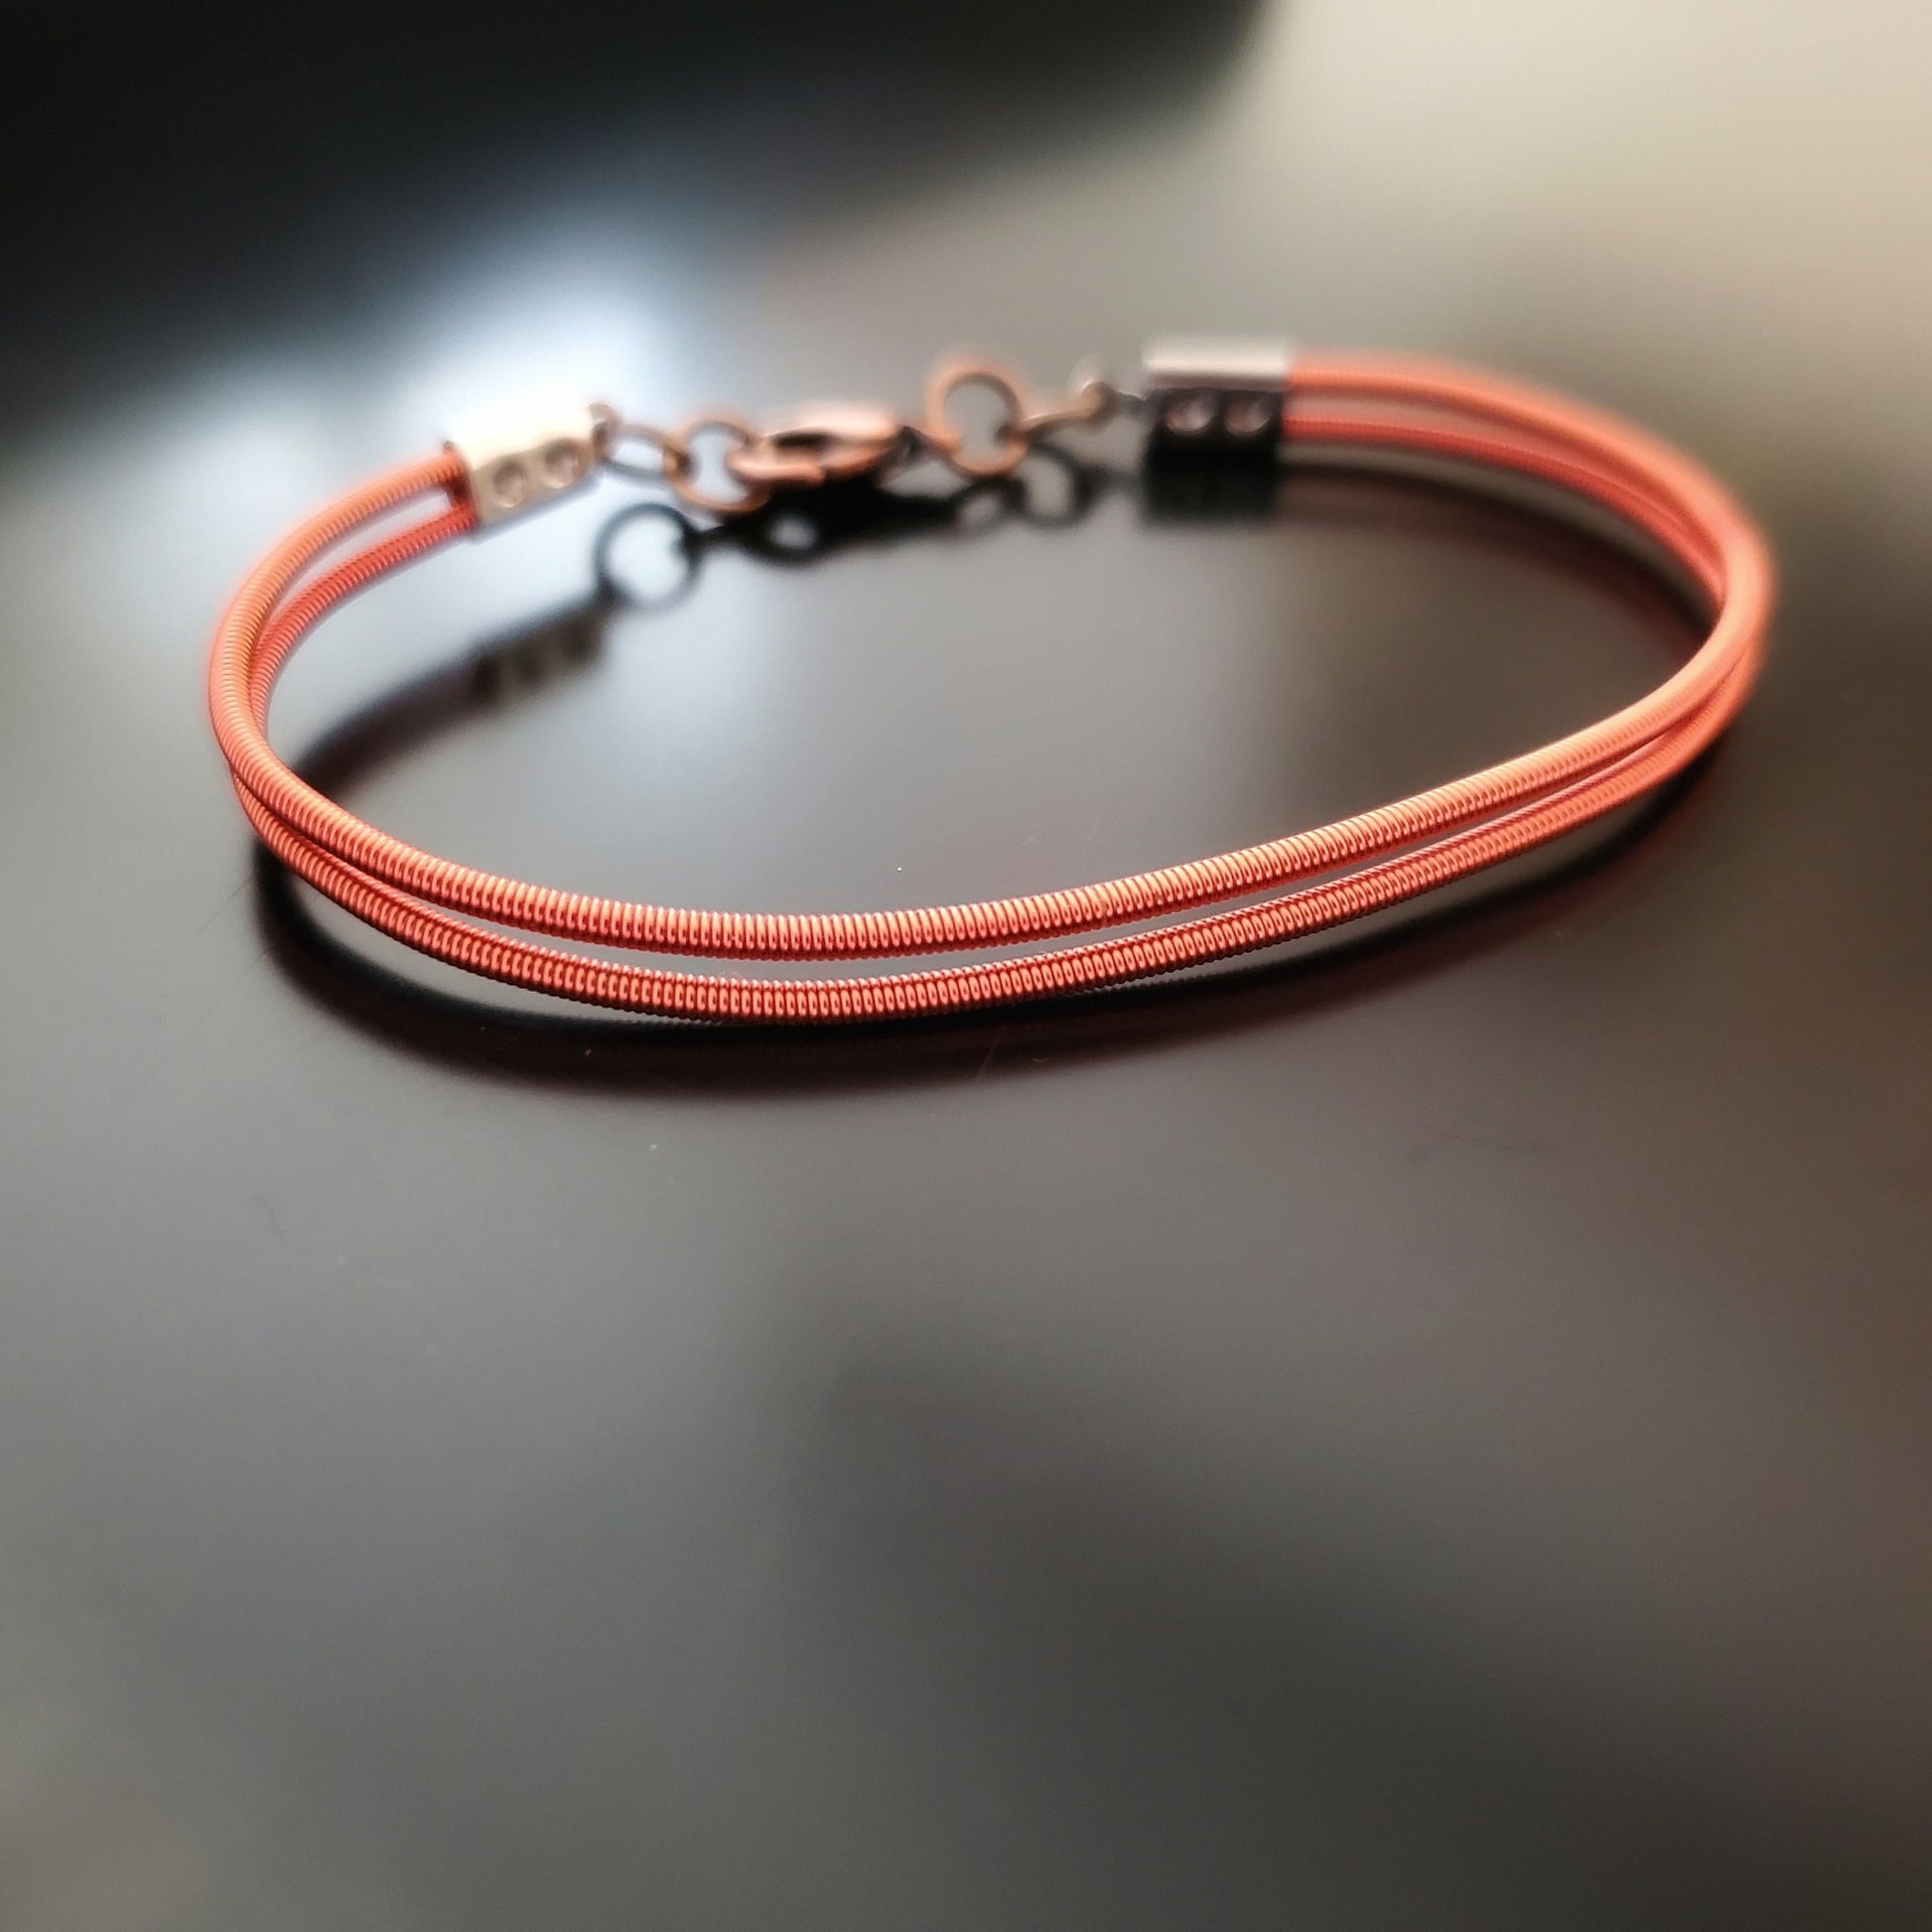 clasp style bracelet made from orange upcycled harp strings